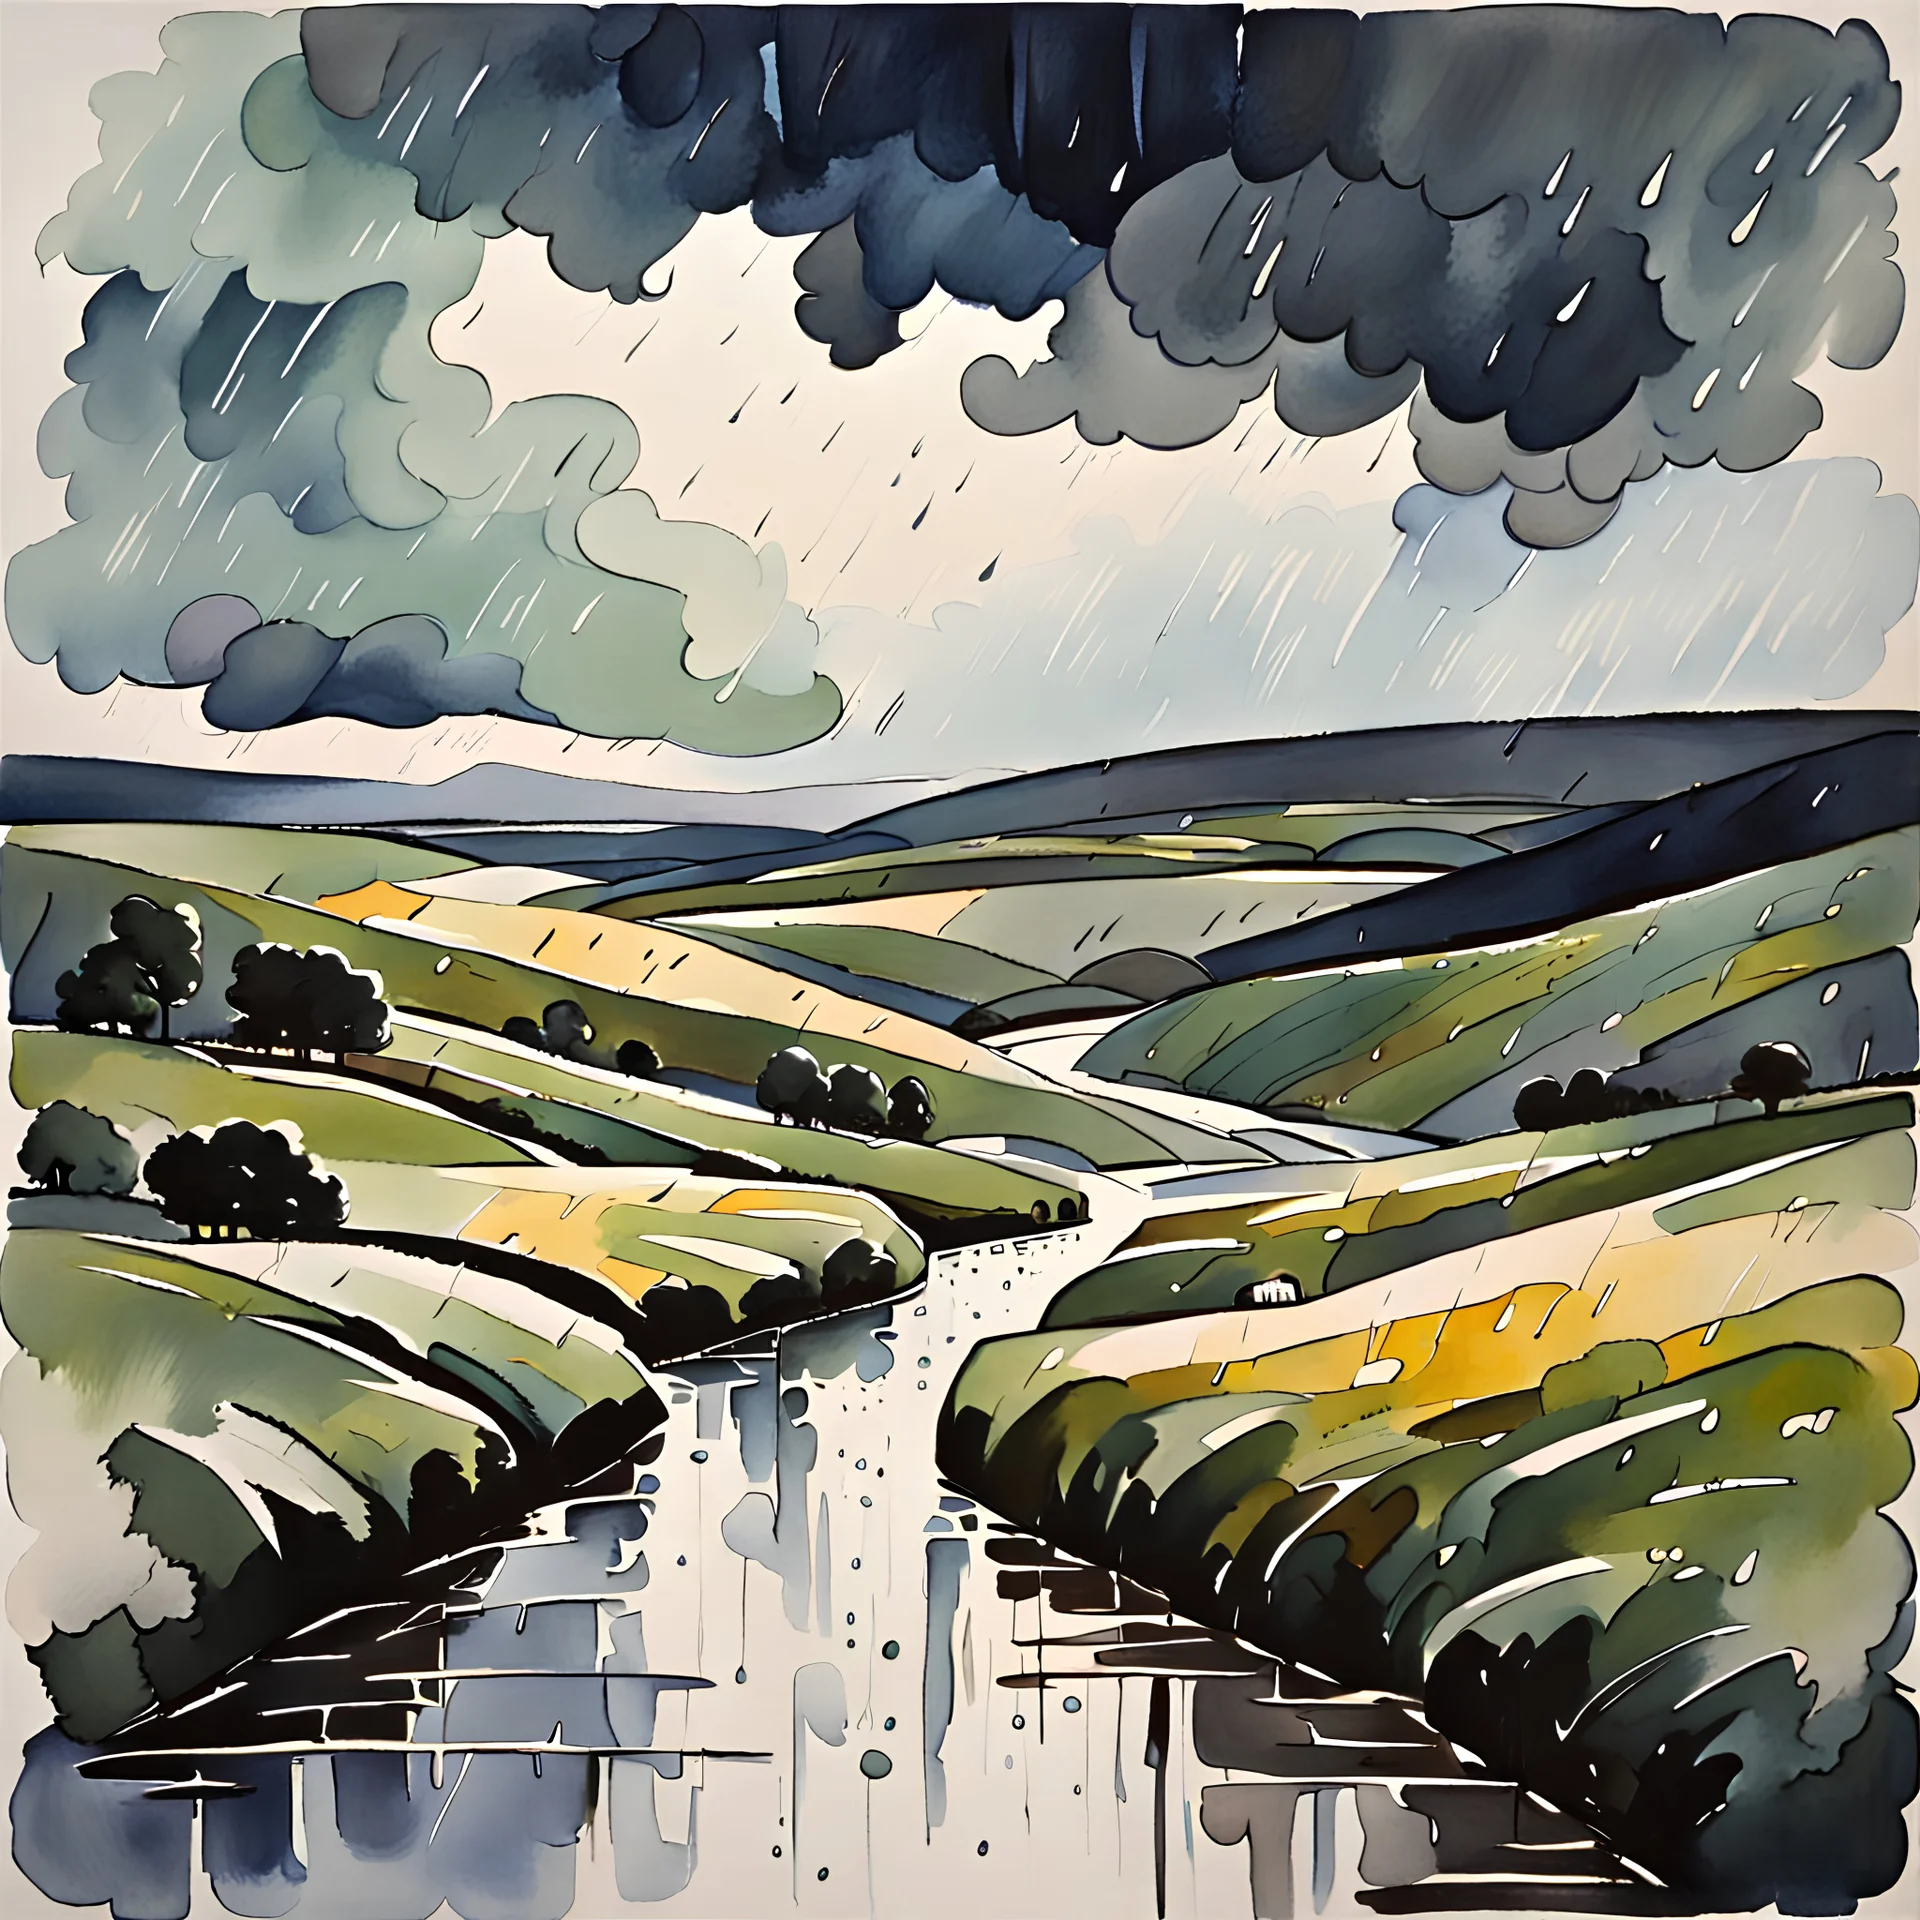 A Yorkshire scenery at dim light and rain painted in watercolours and oils by expressionist